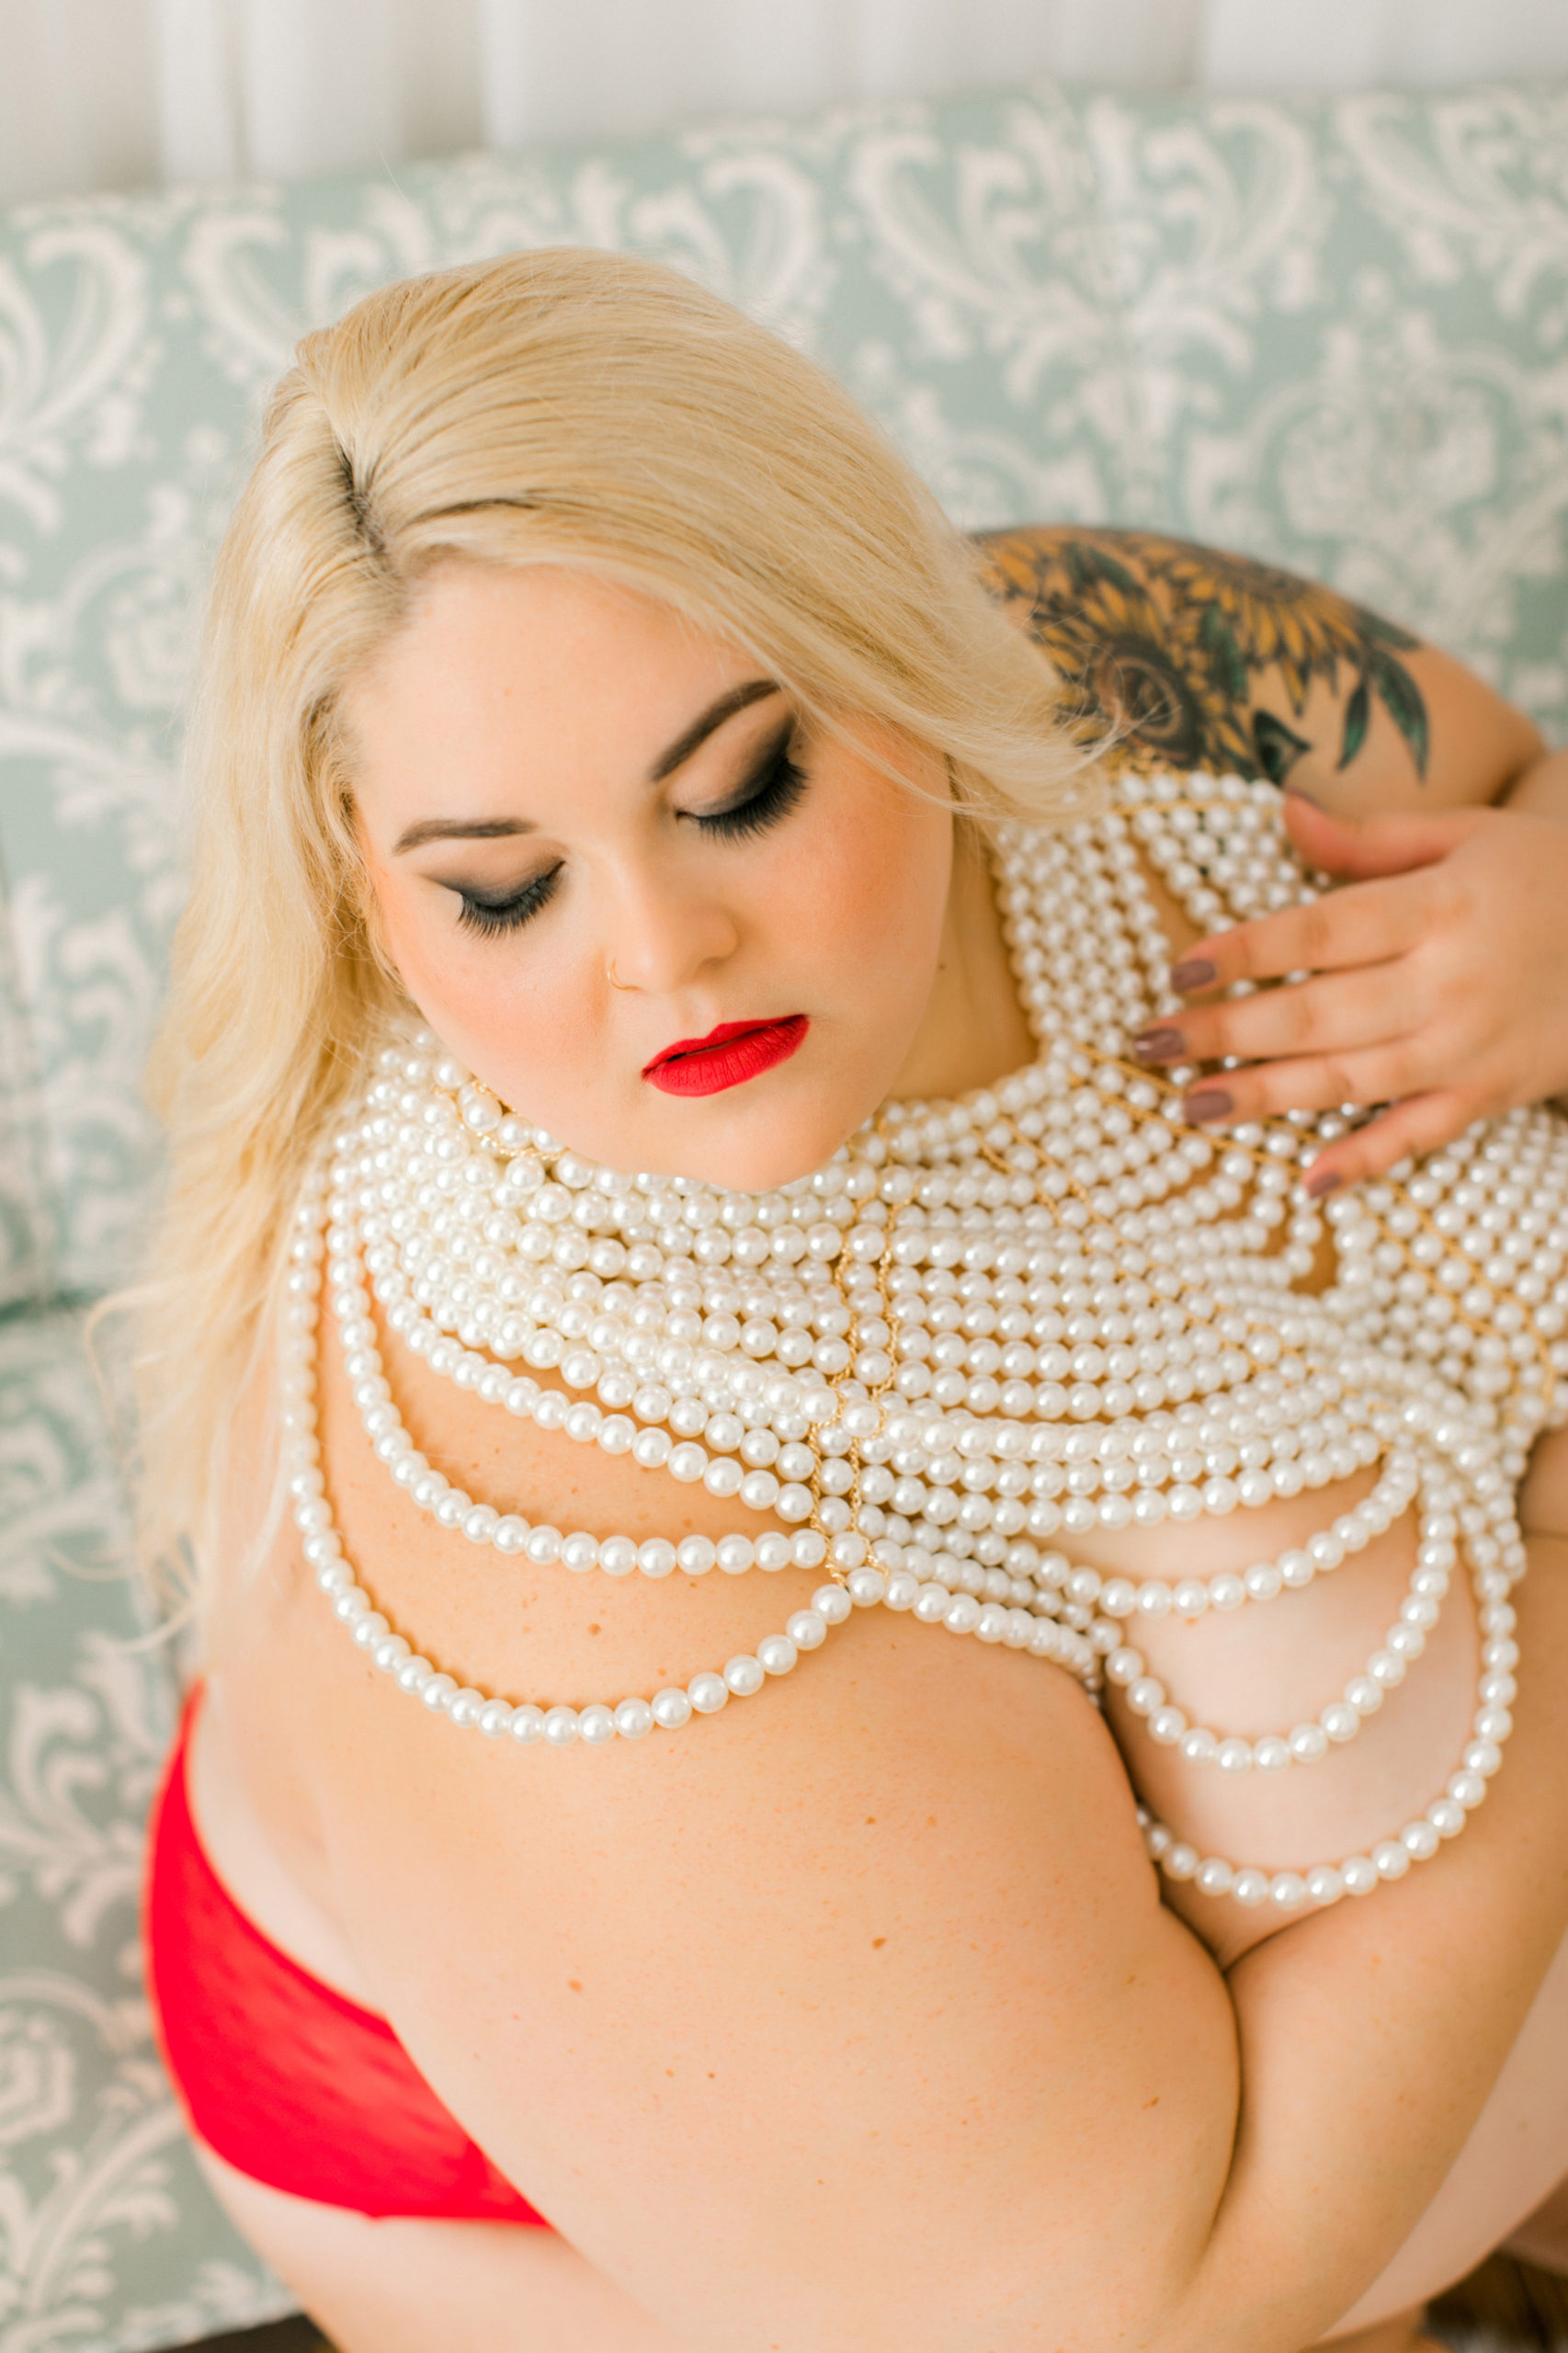 Classy and tasteful boudoir session with elegant pearl top